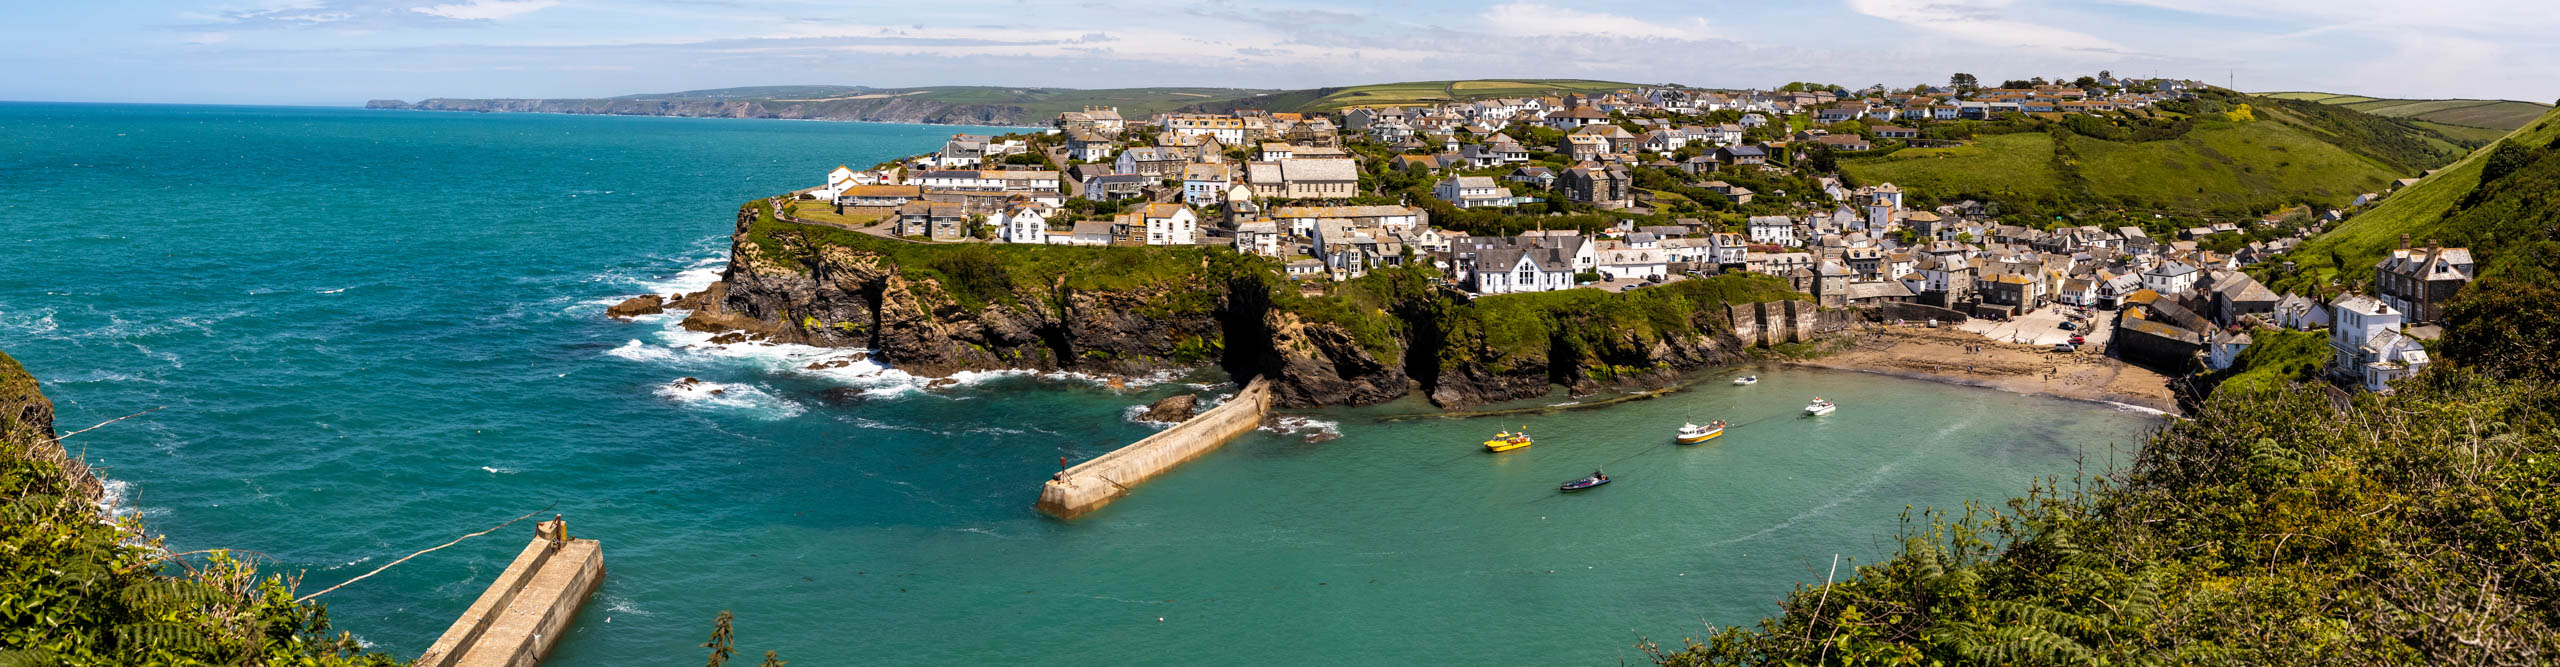 View of coastal town of Port Isaac with boats in the water, in spring with a bright blue sky 